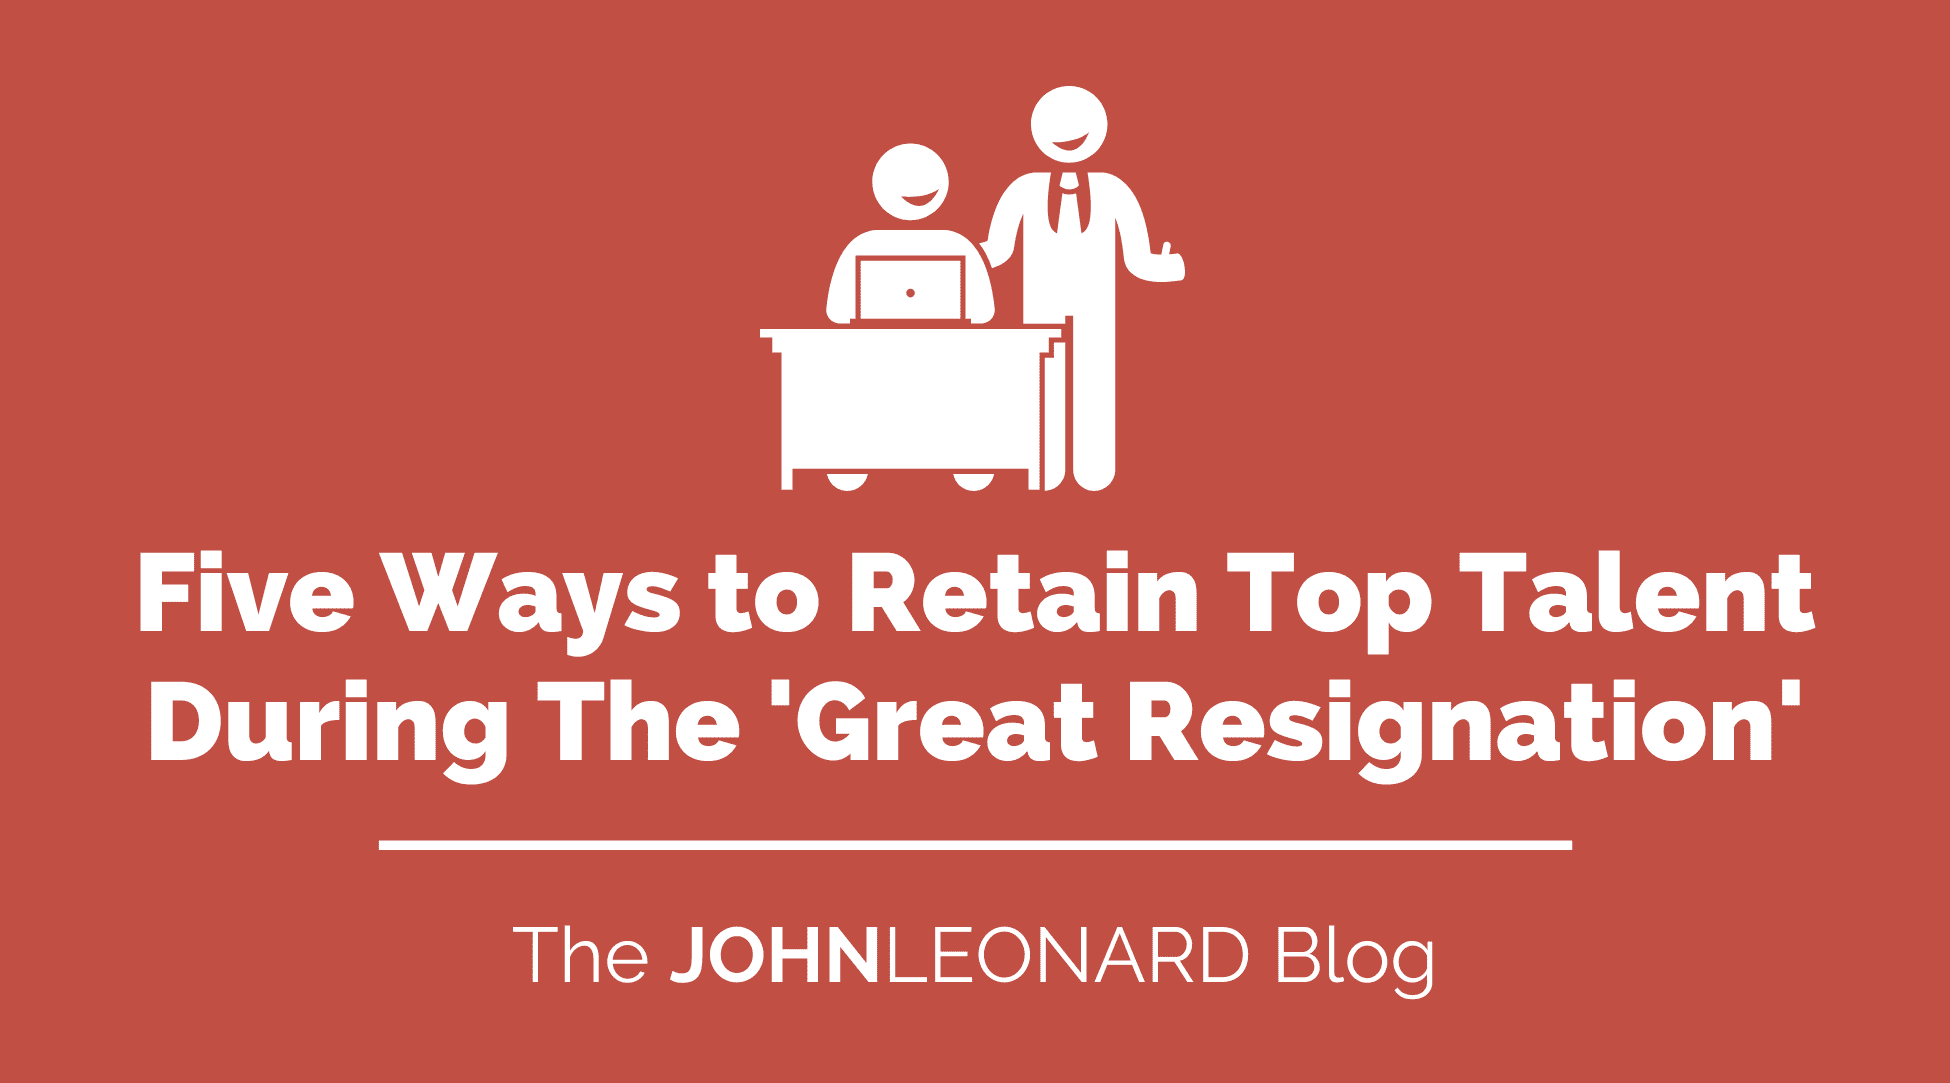 Five Ways to Retain Top Talent blog images 